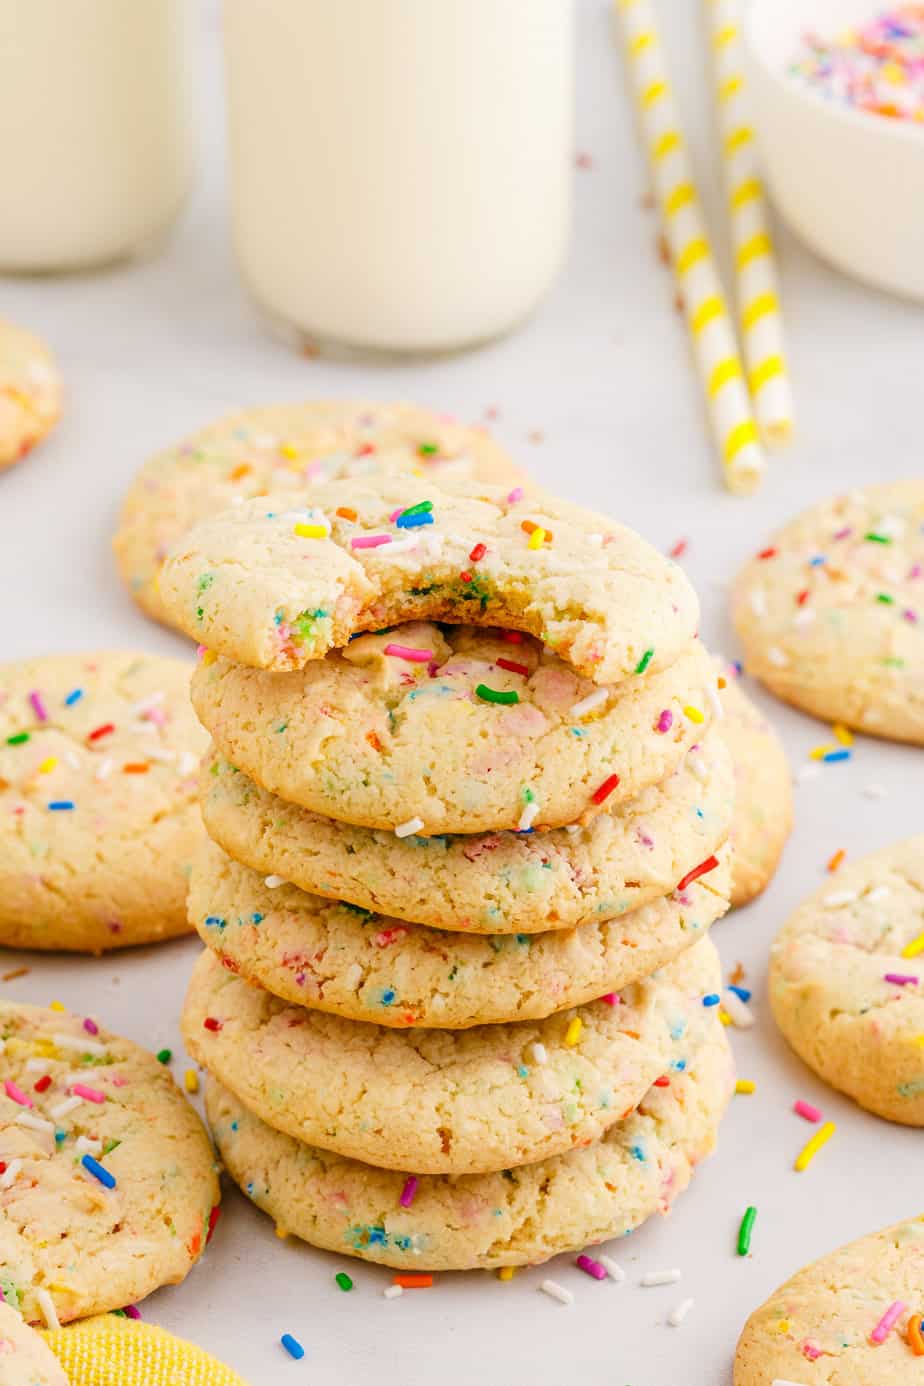 A tall stack of funfetti cake mix cookies from the side on a counter with the top cookie missing a bite and more cookies scattered around the counter.